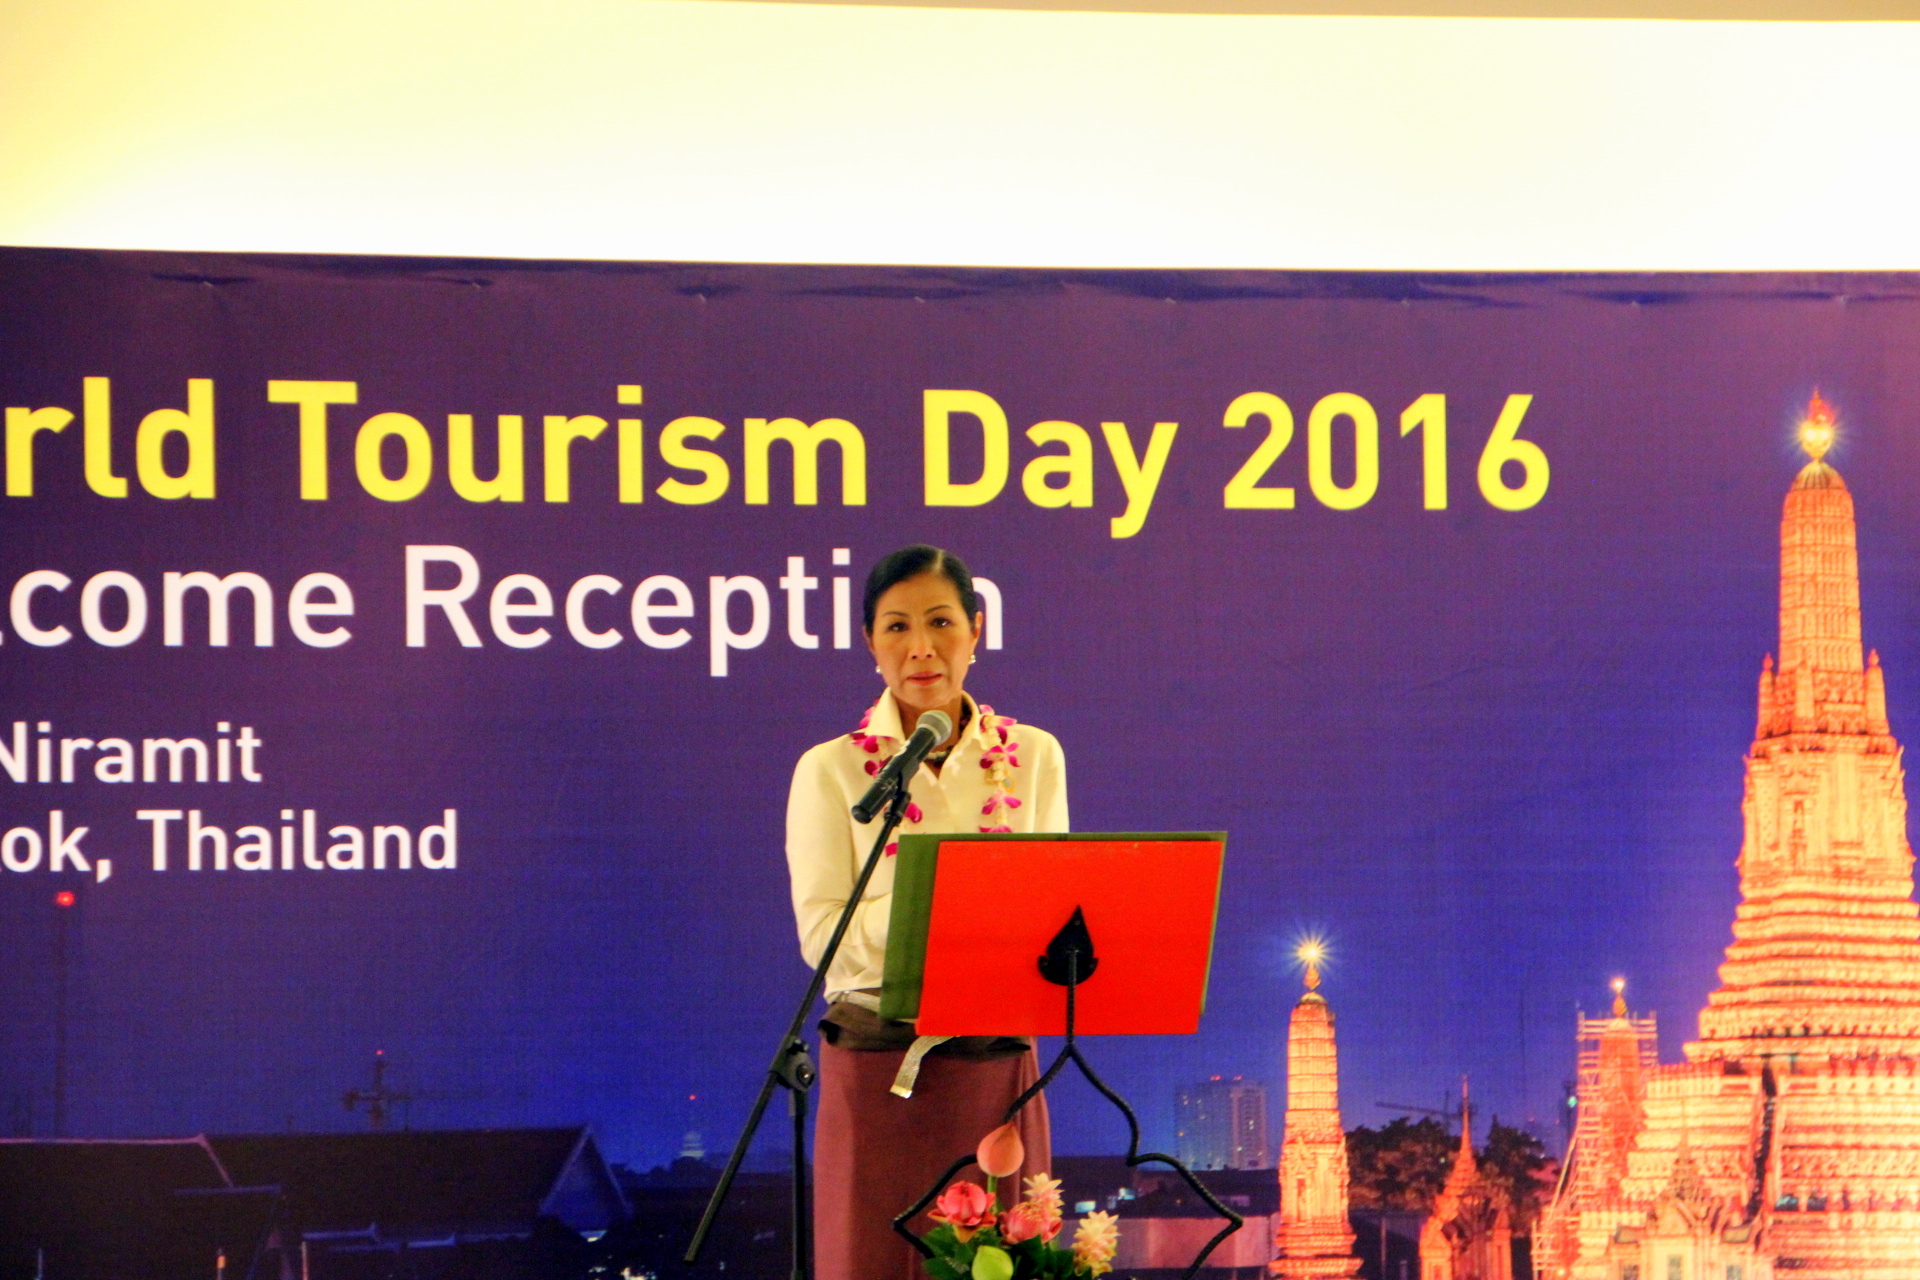 Thailand Minister of Tourism and Sports